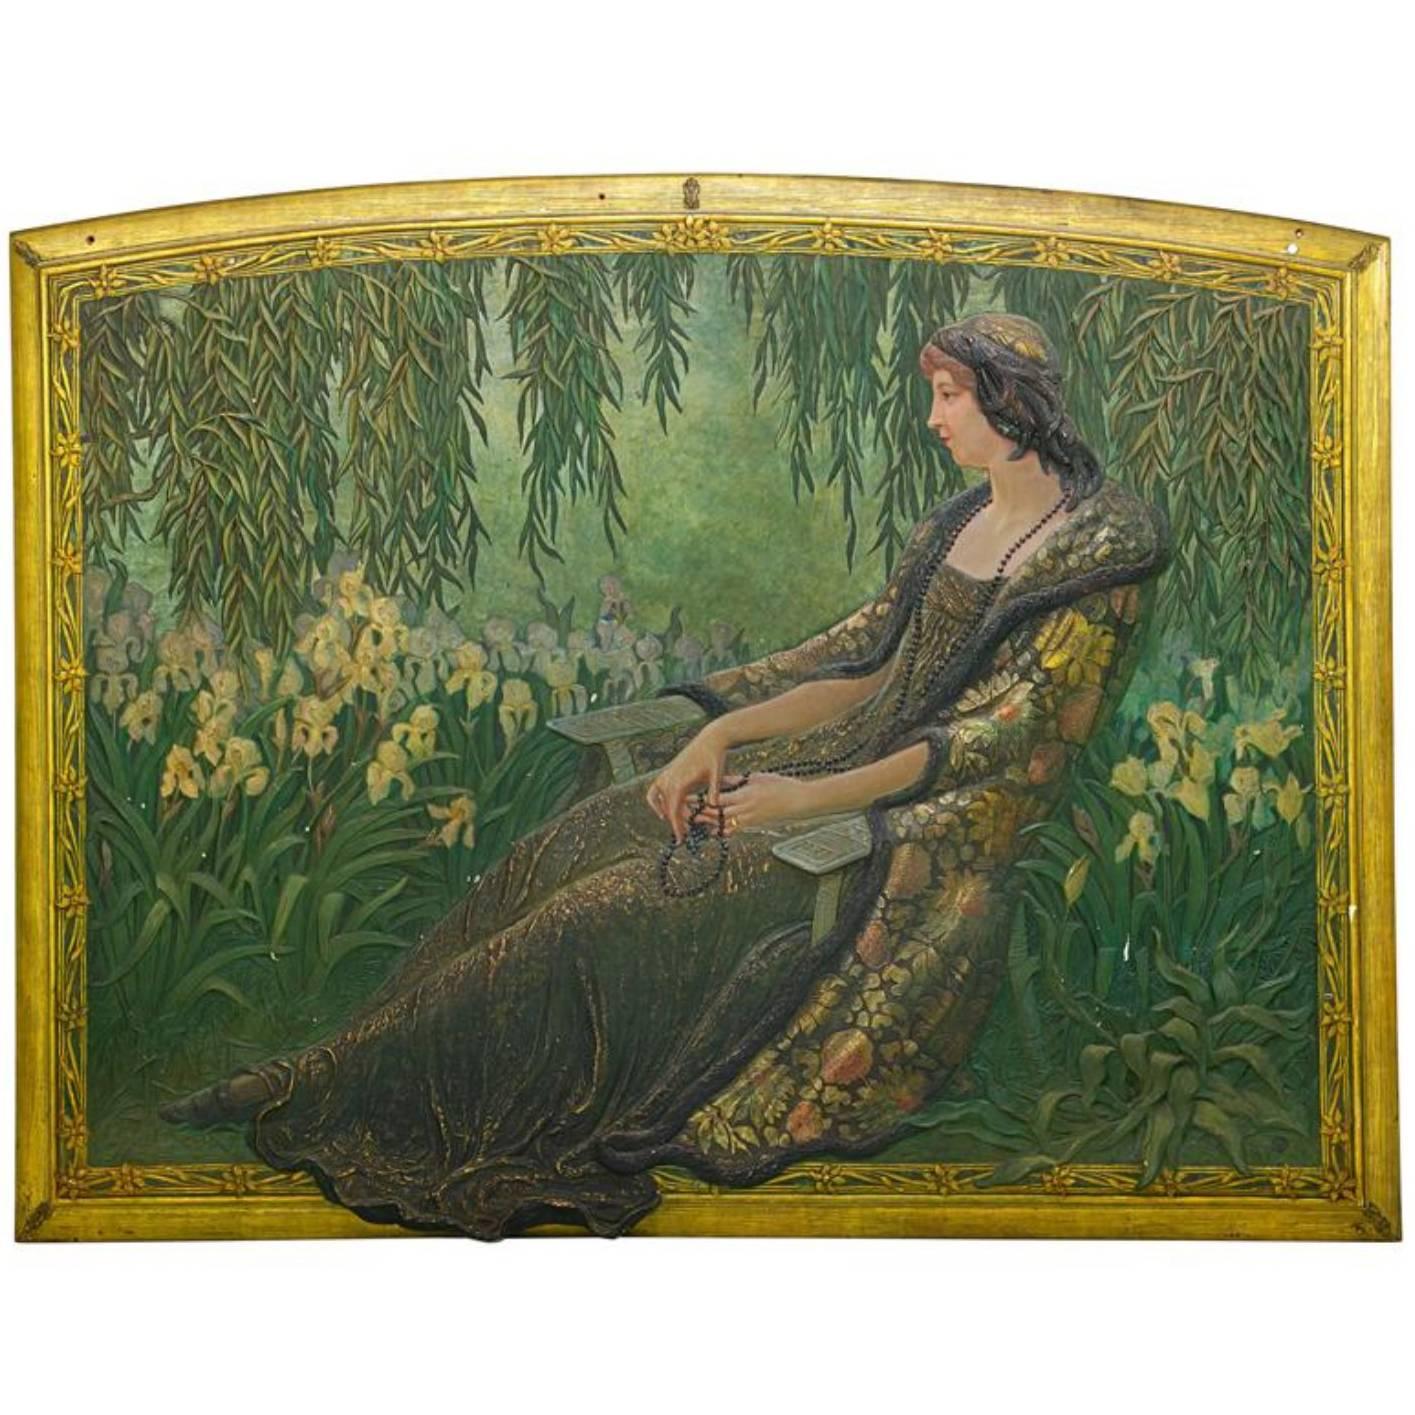 Massive Art Nouveau Painted Wall Panel of a Seated Woman with Irises in a Garden